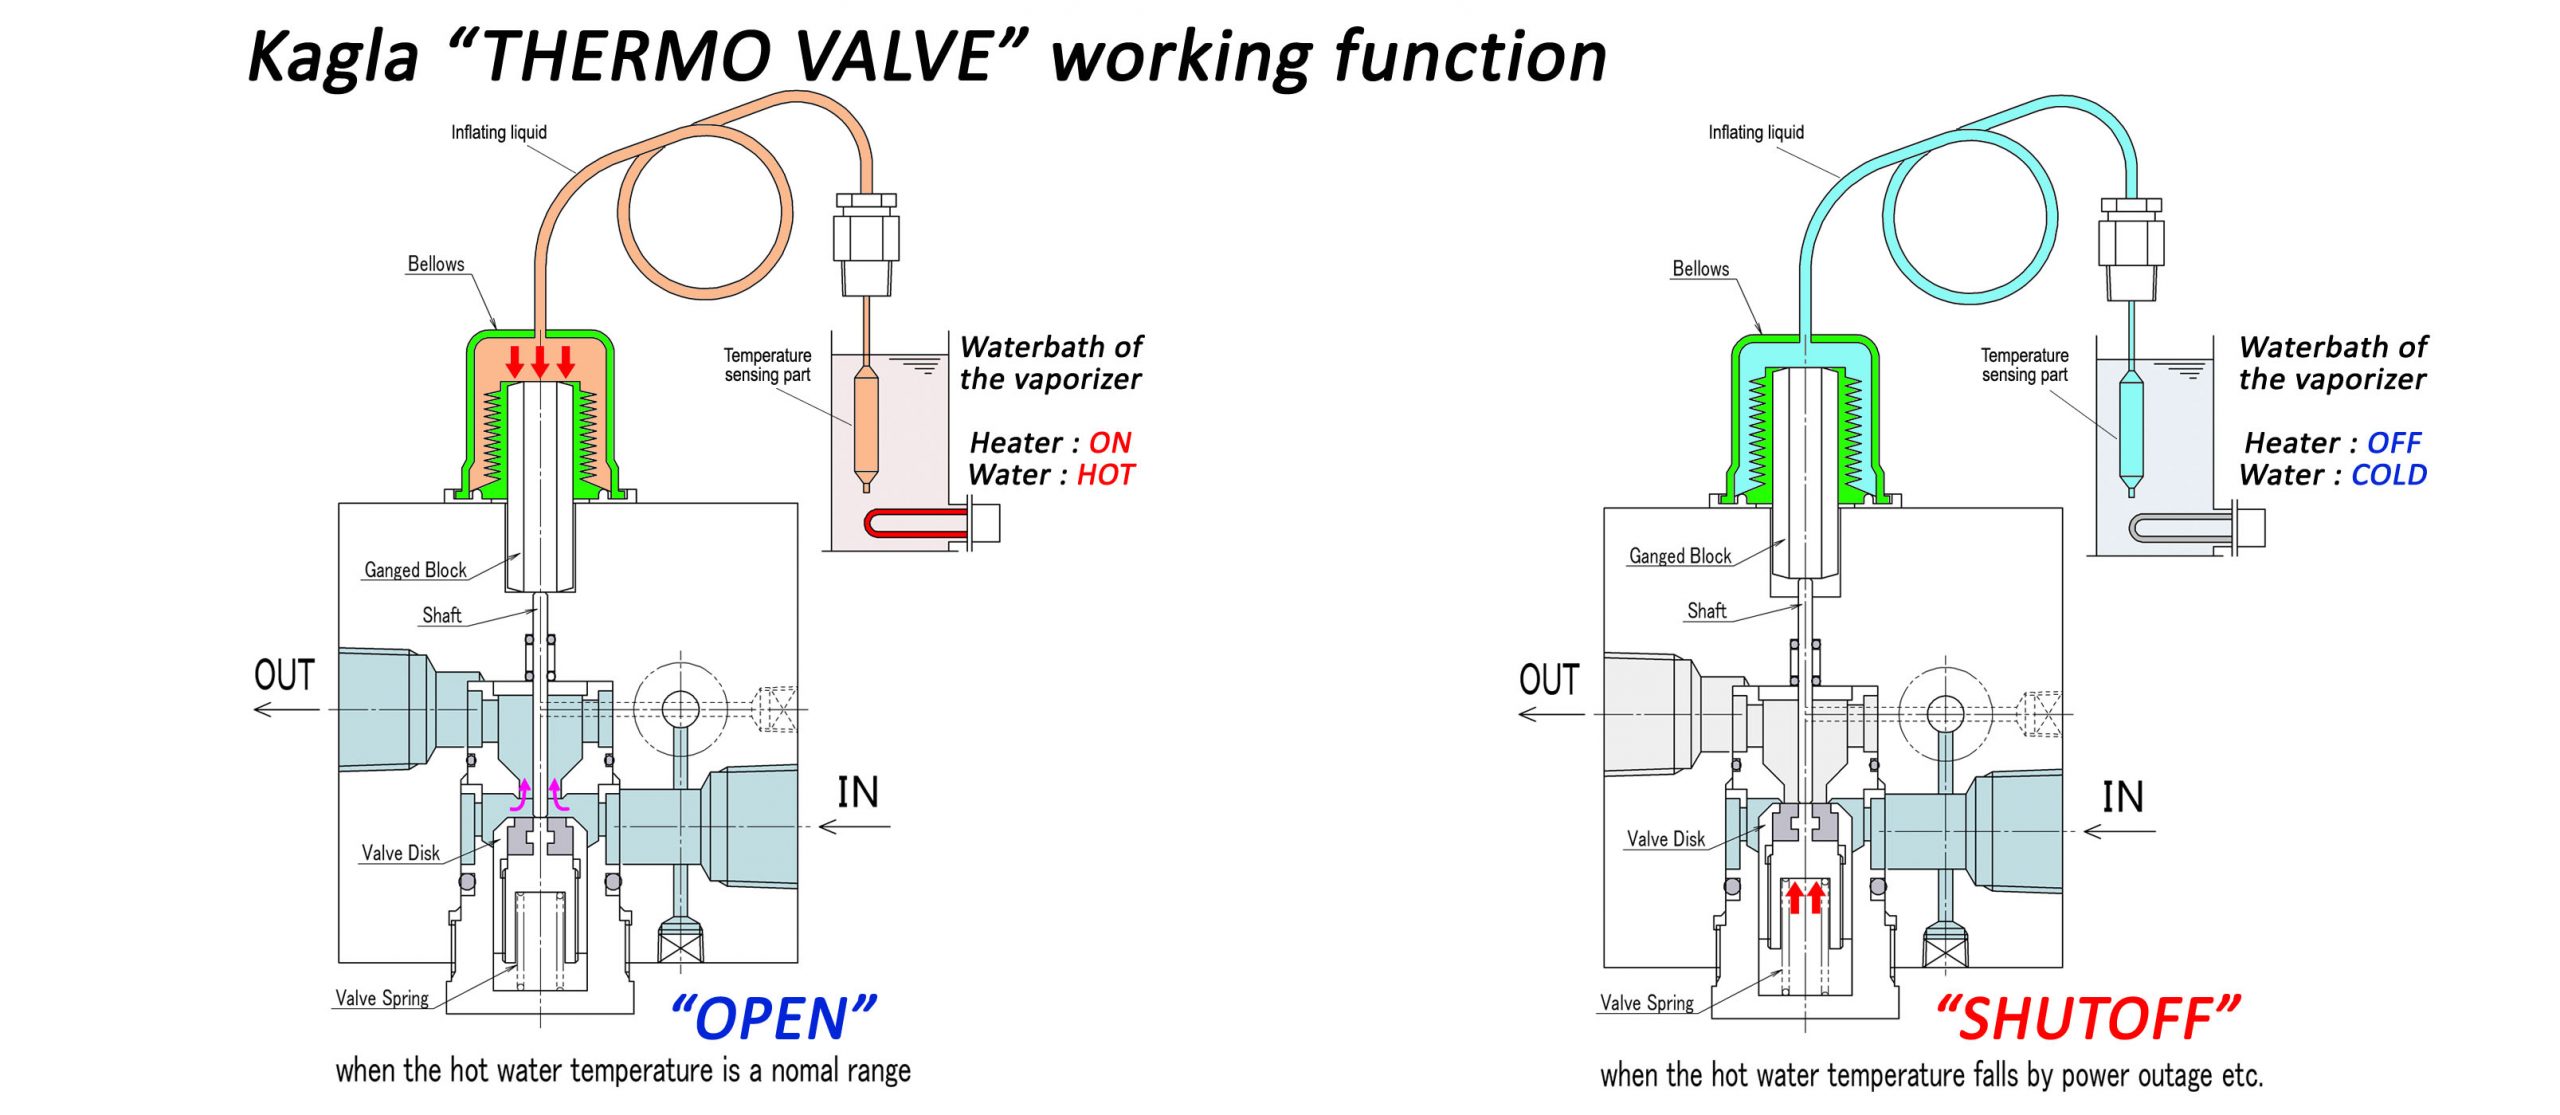 Visual image of how Kagla THERMO VALVE safety system functions to prevent liquid carryover